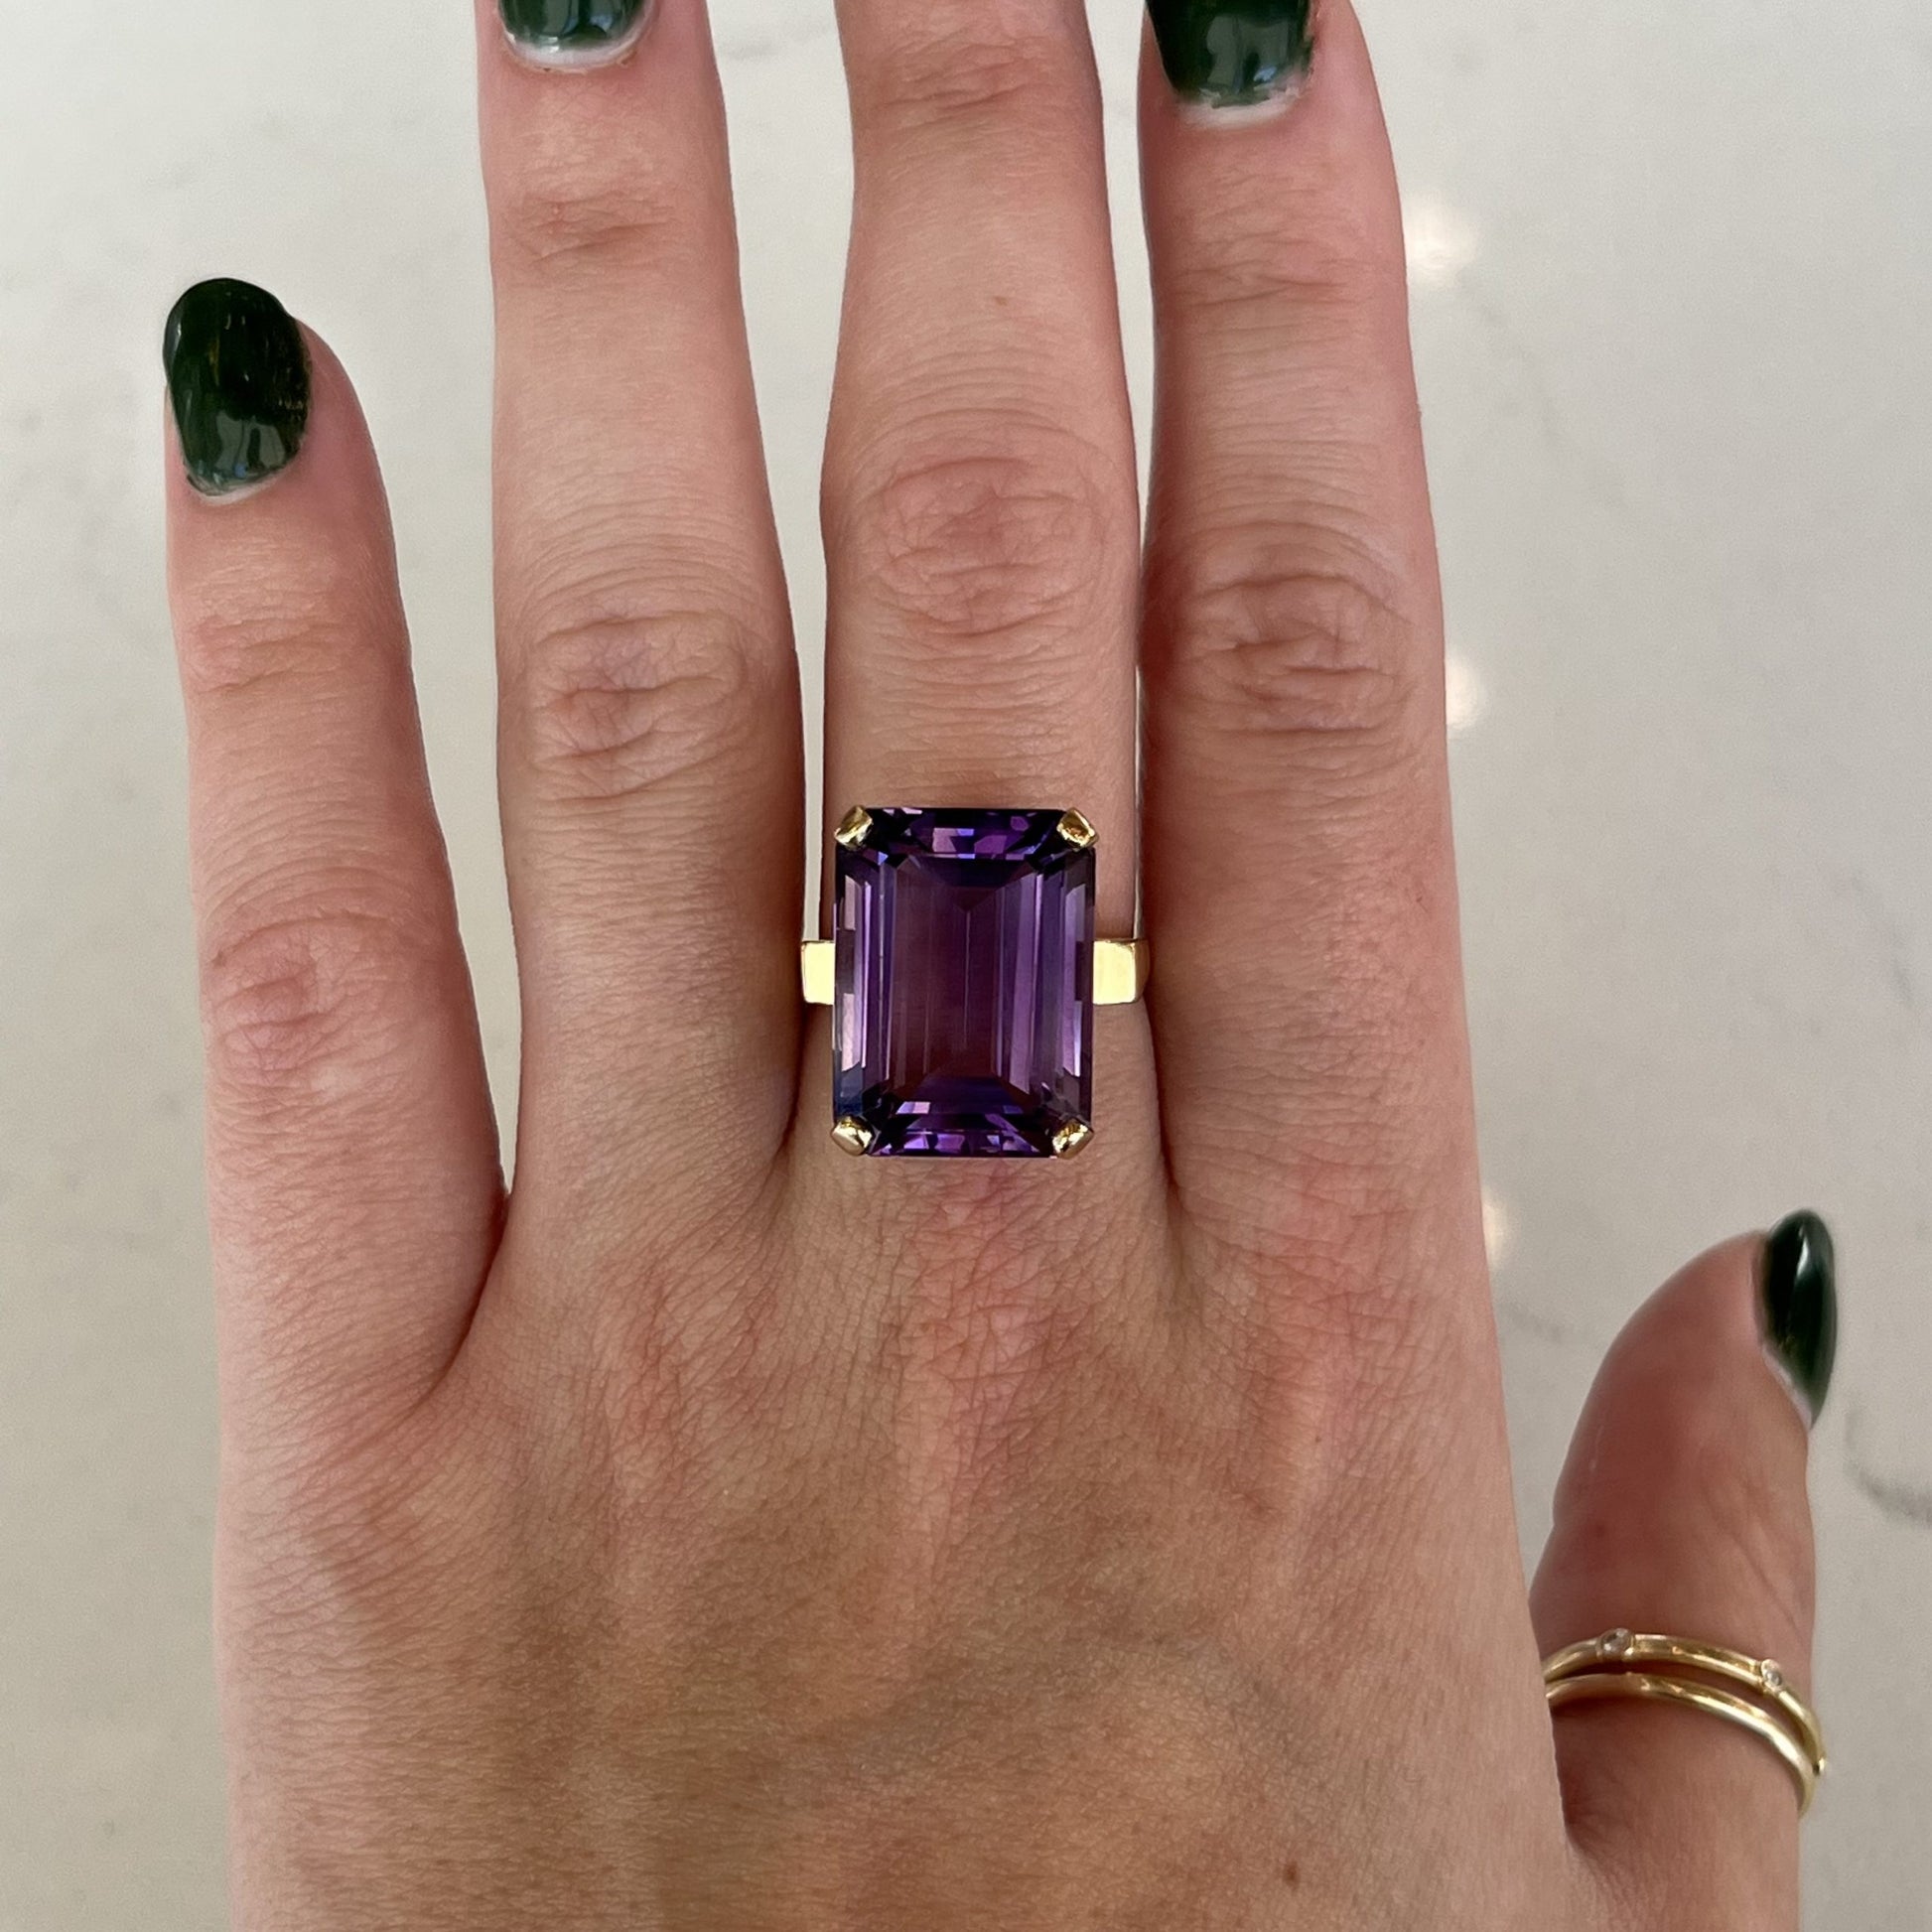 Large Emerald Cut Amethyst Cocktail Ring in 14k Yellow Gold